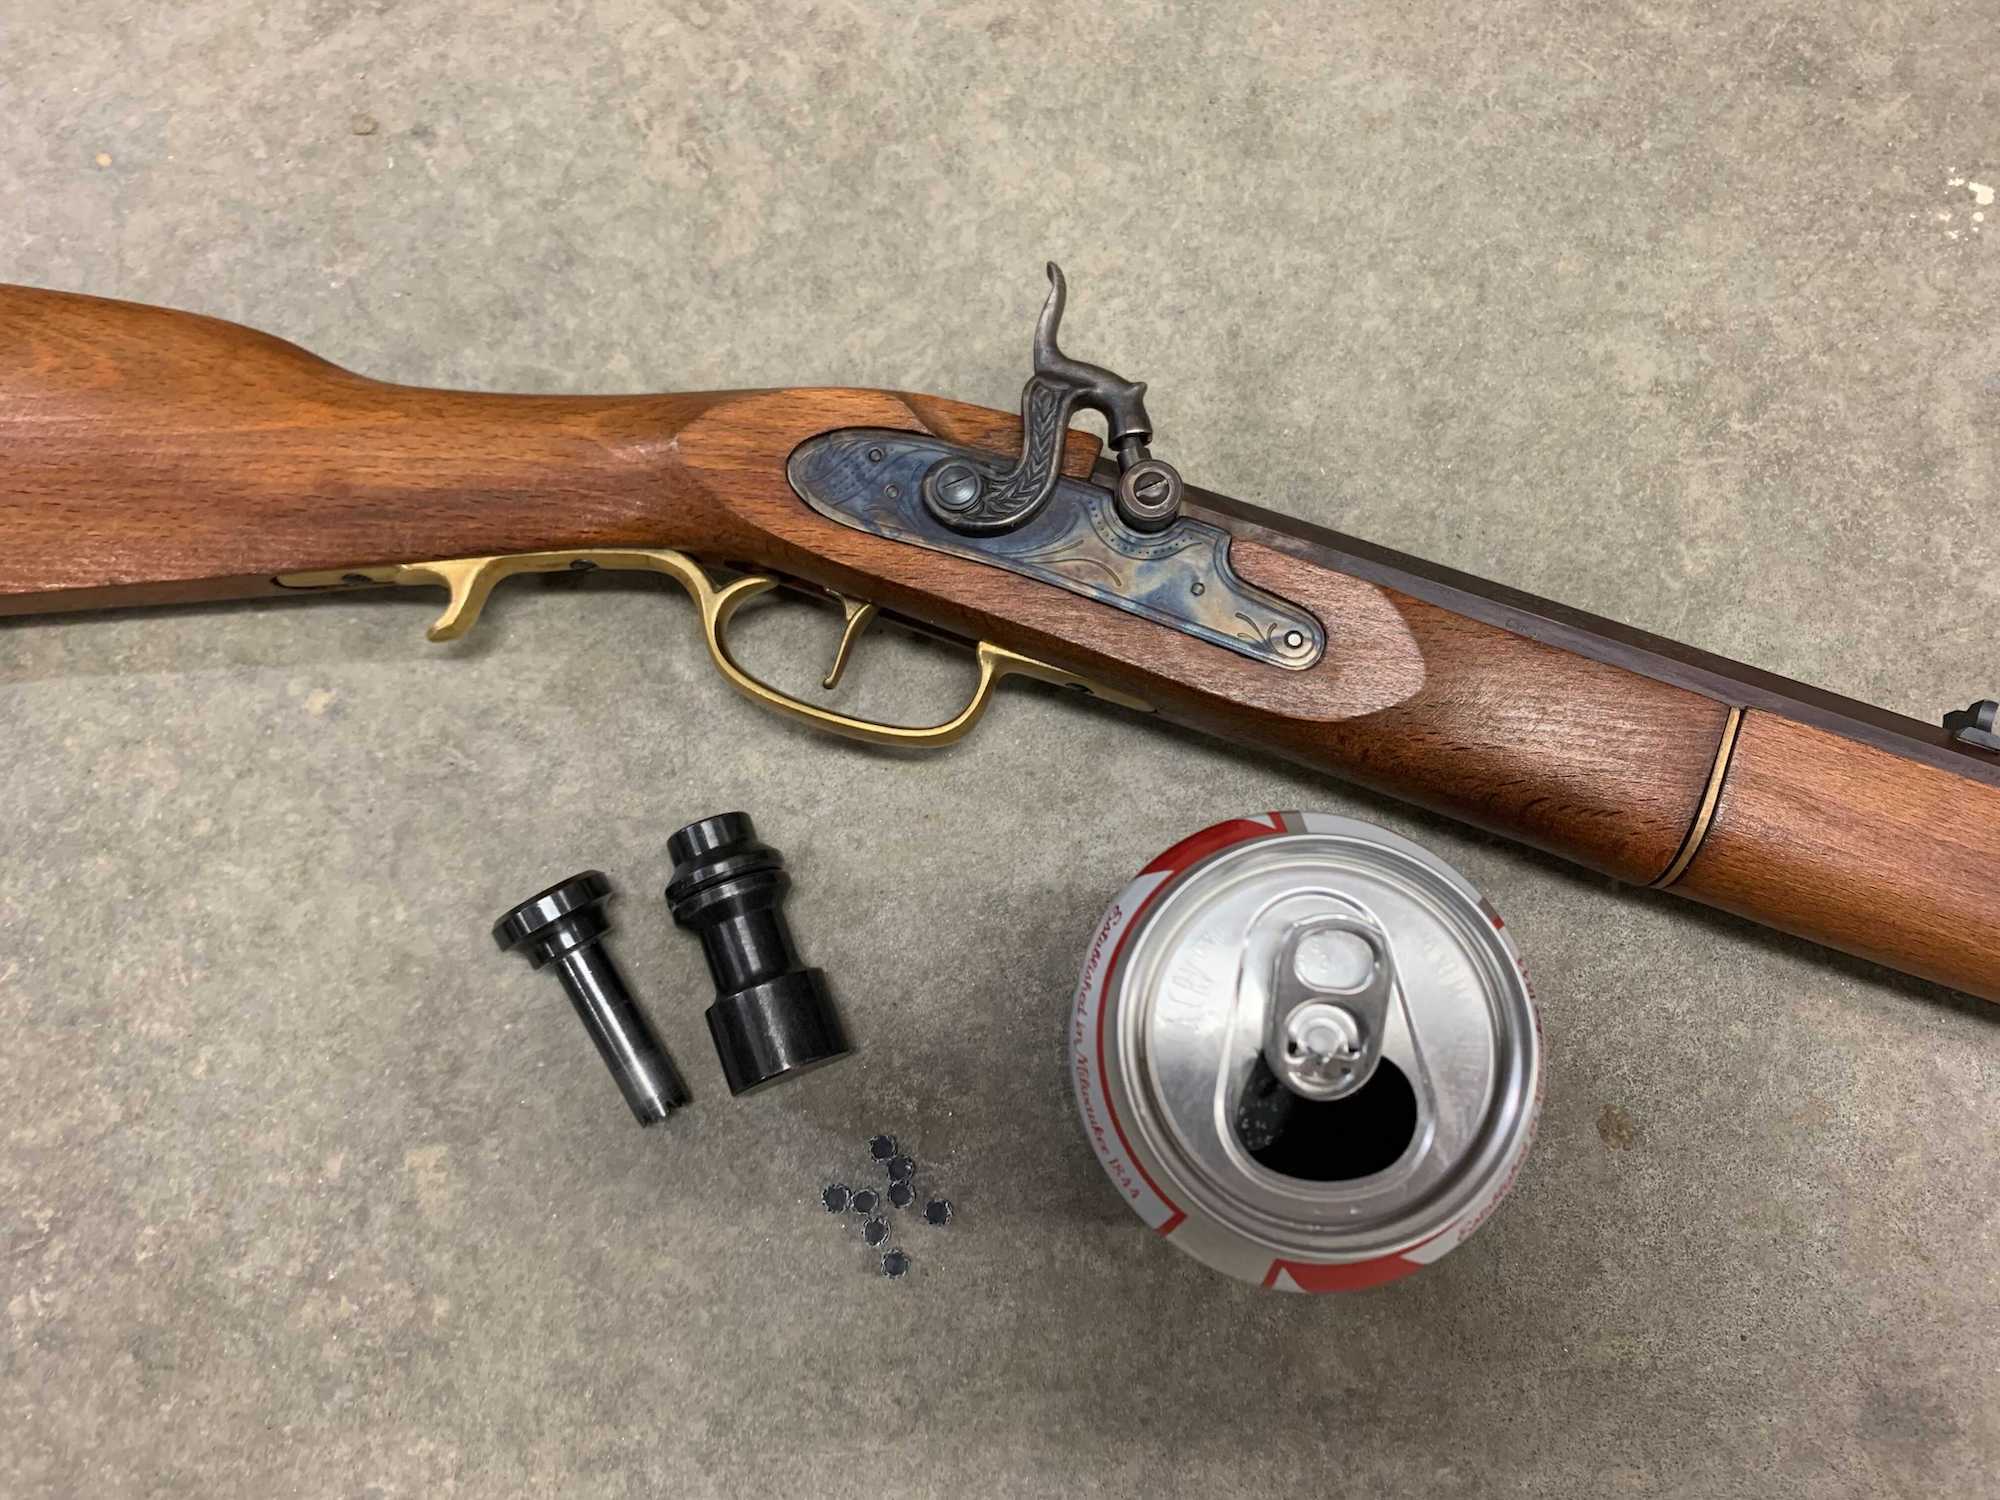 A muzzleloader next to an aluminum can and two percussion cap makers